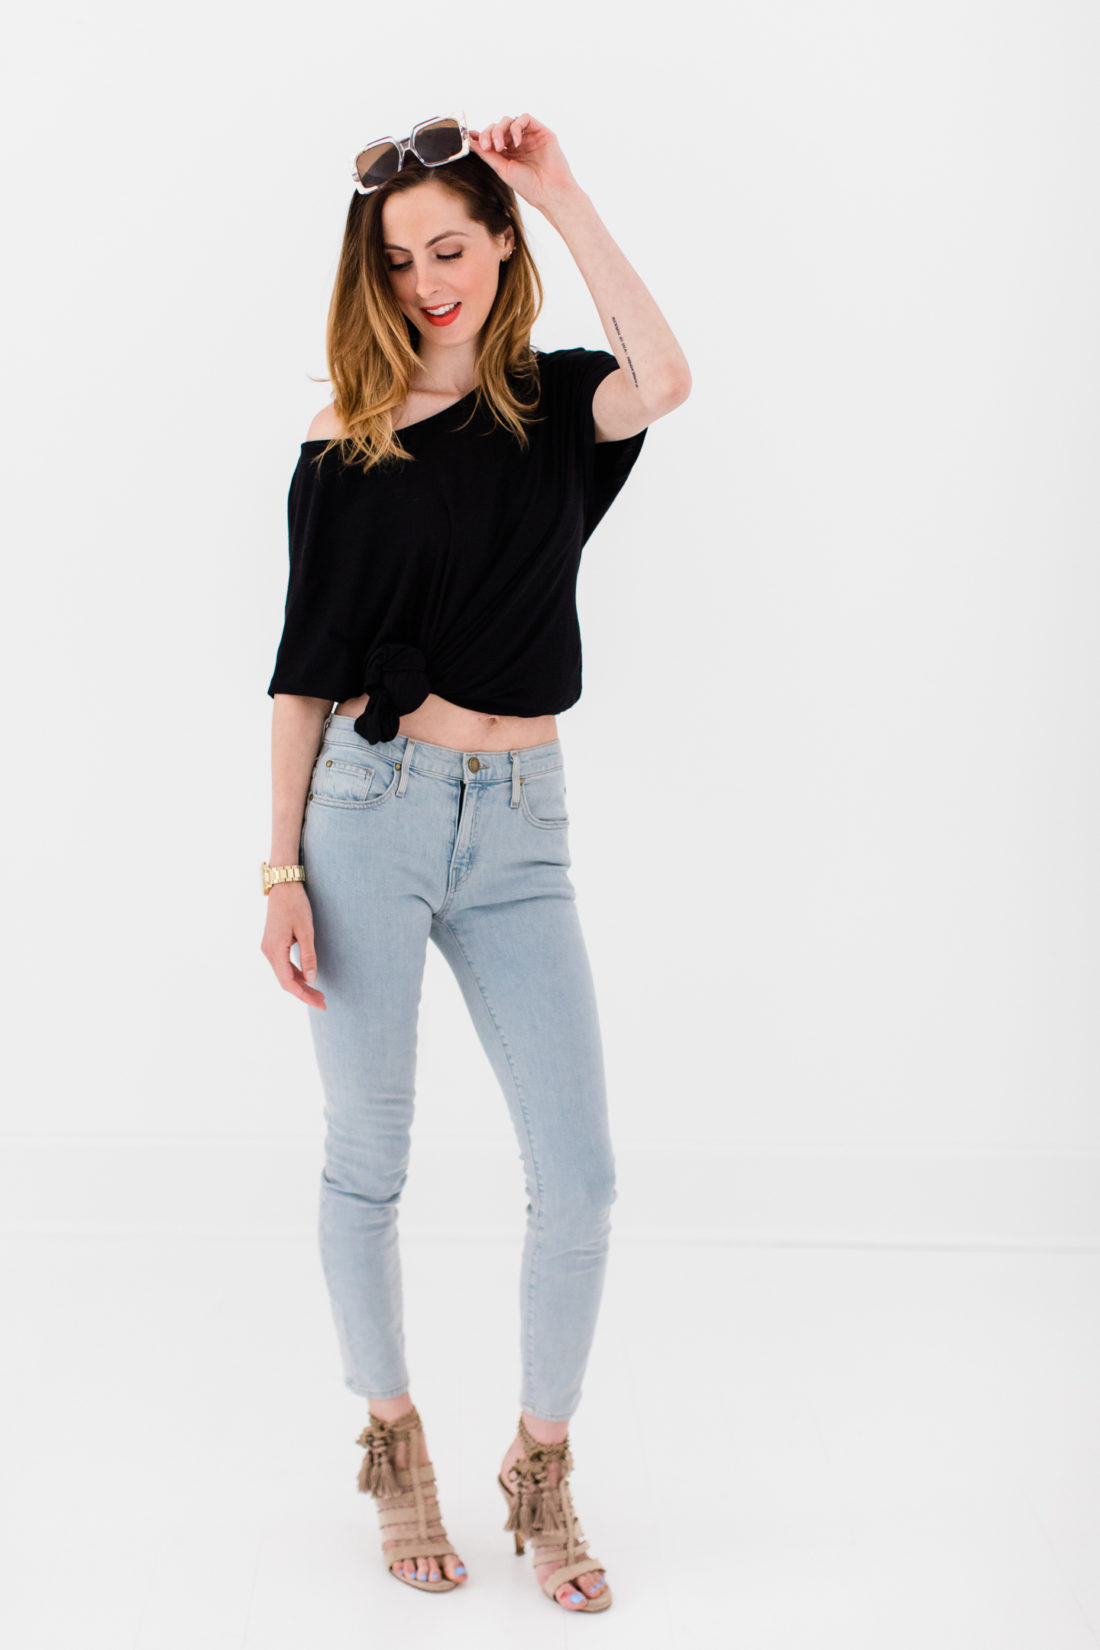 Eva Amurri Martino wears a black knotted top, jeans, and heels